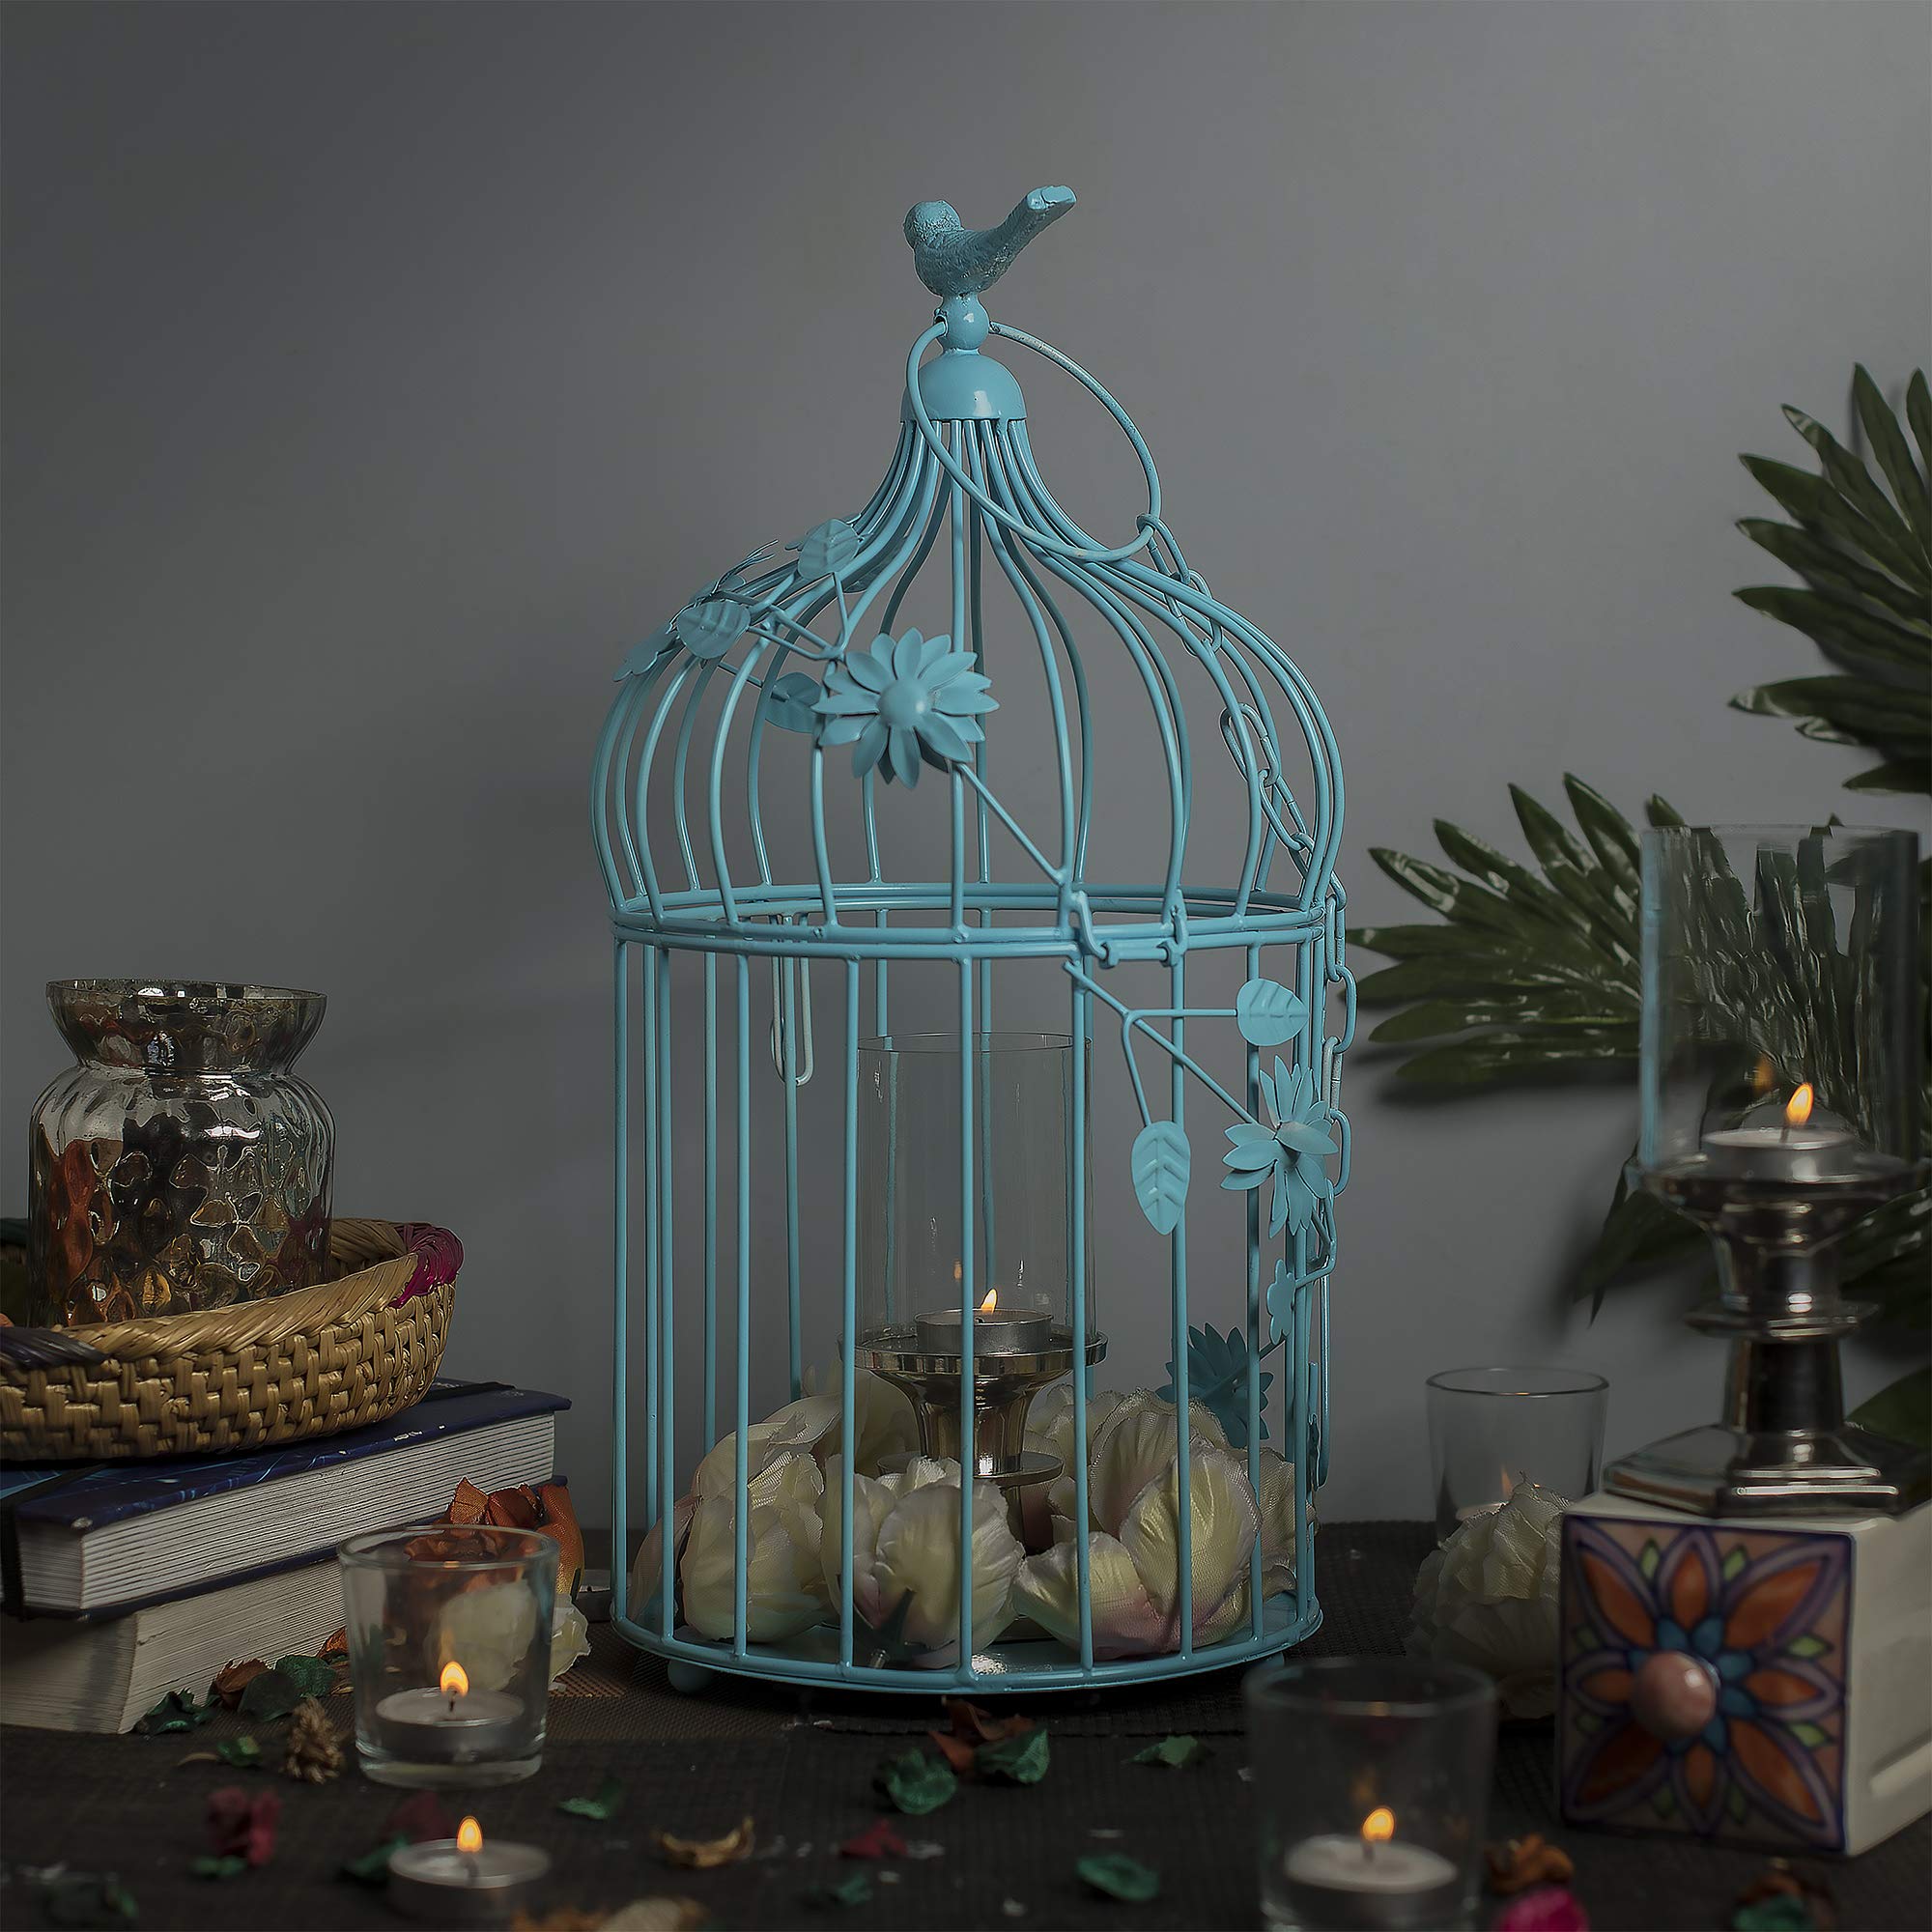 HomesakeÃ‚Â® Turquoise Bird Cage with Floral Vine Large Single, with Hanging Chain, Decorative Tealight Candle Holder